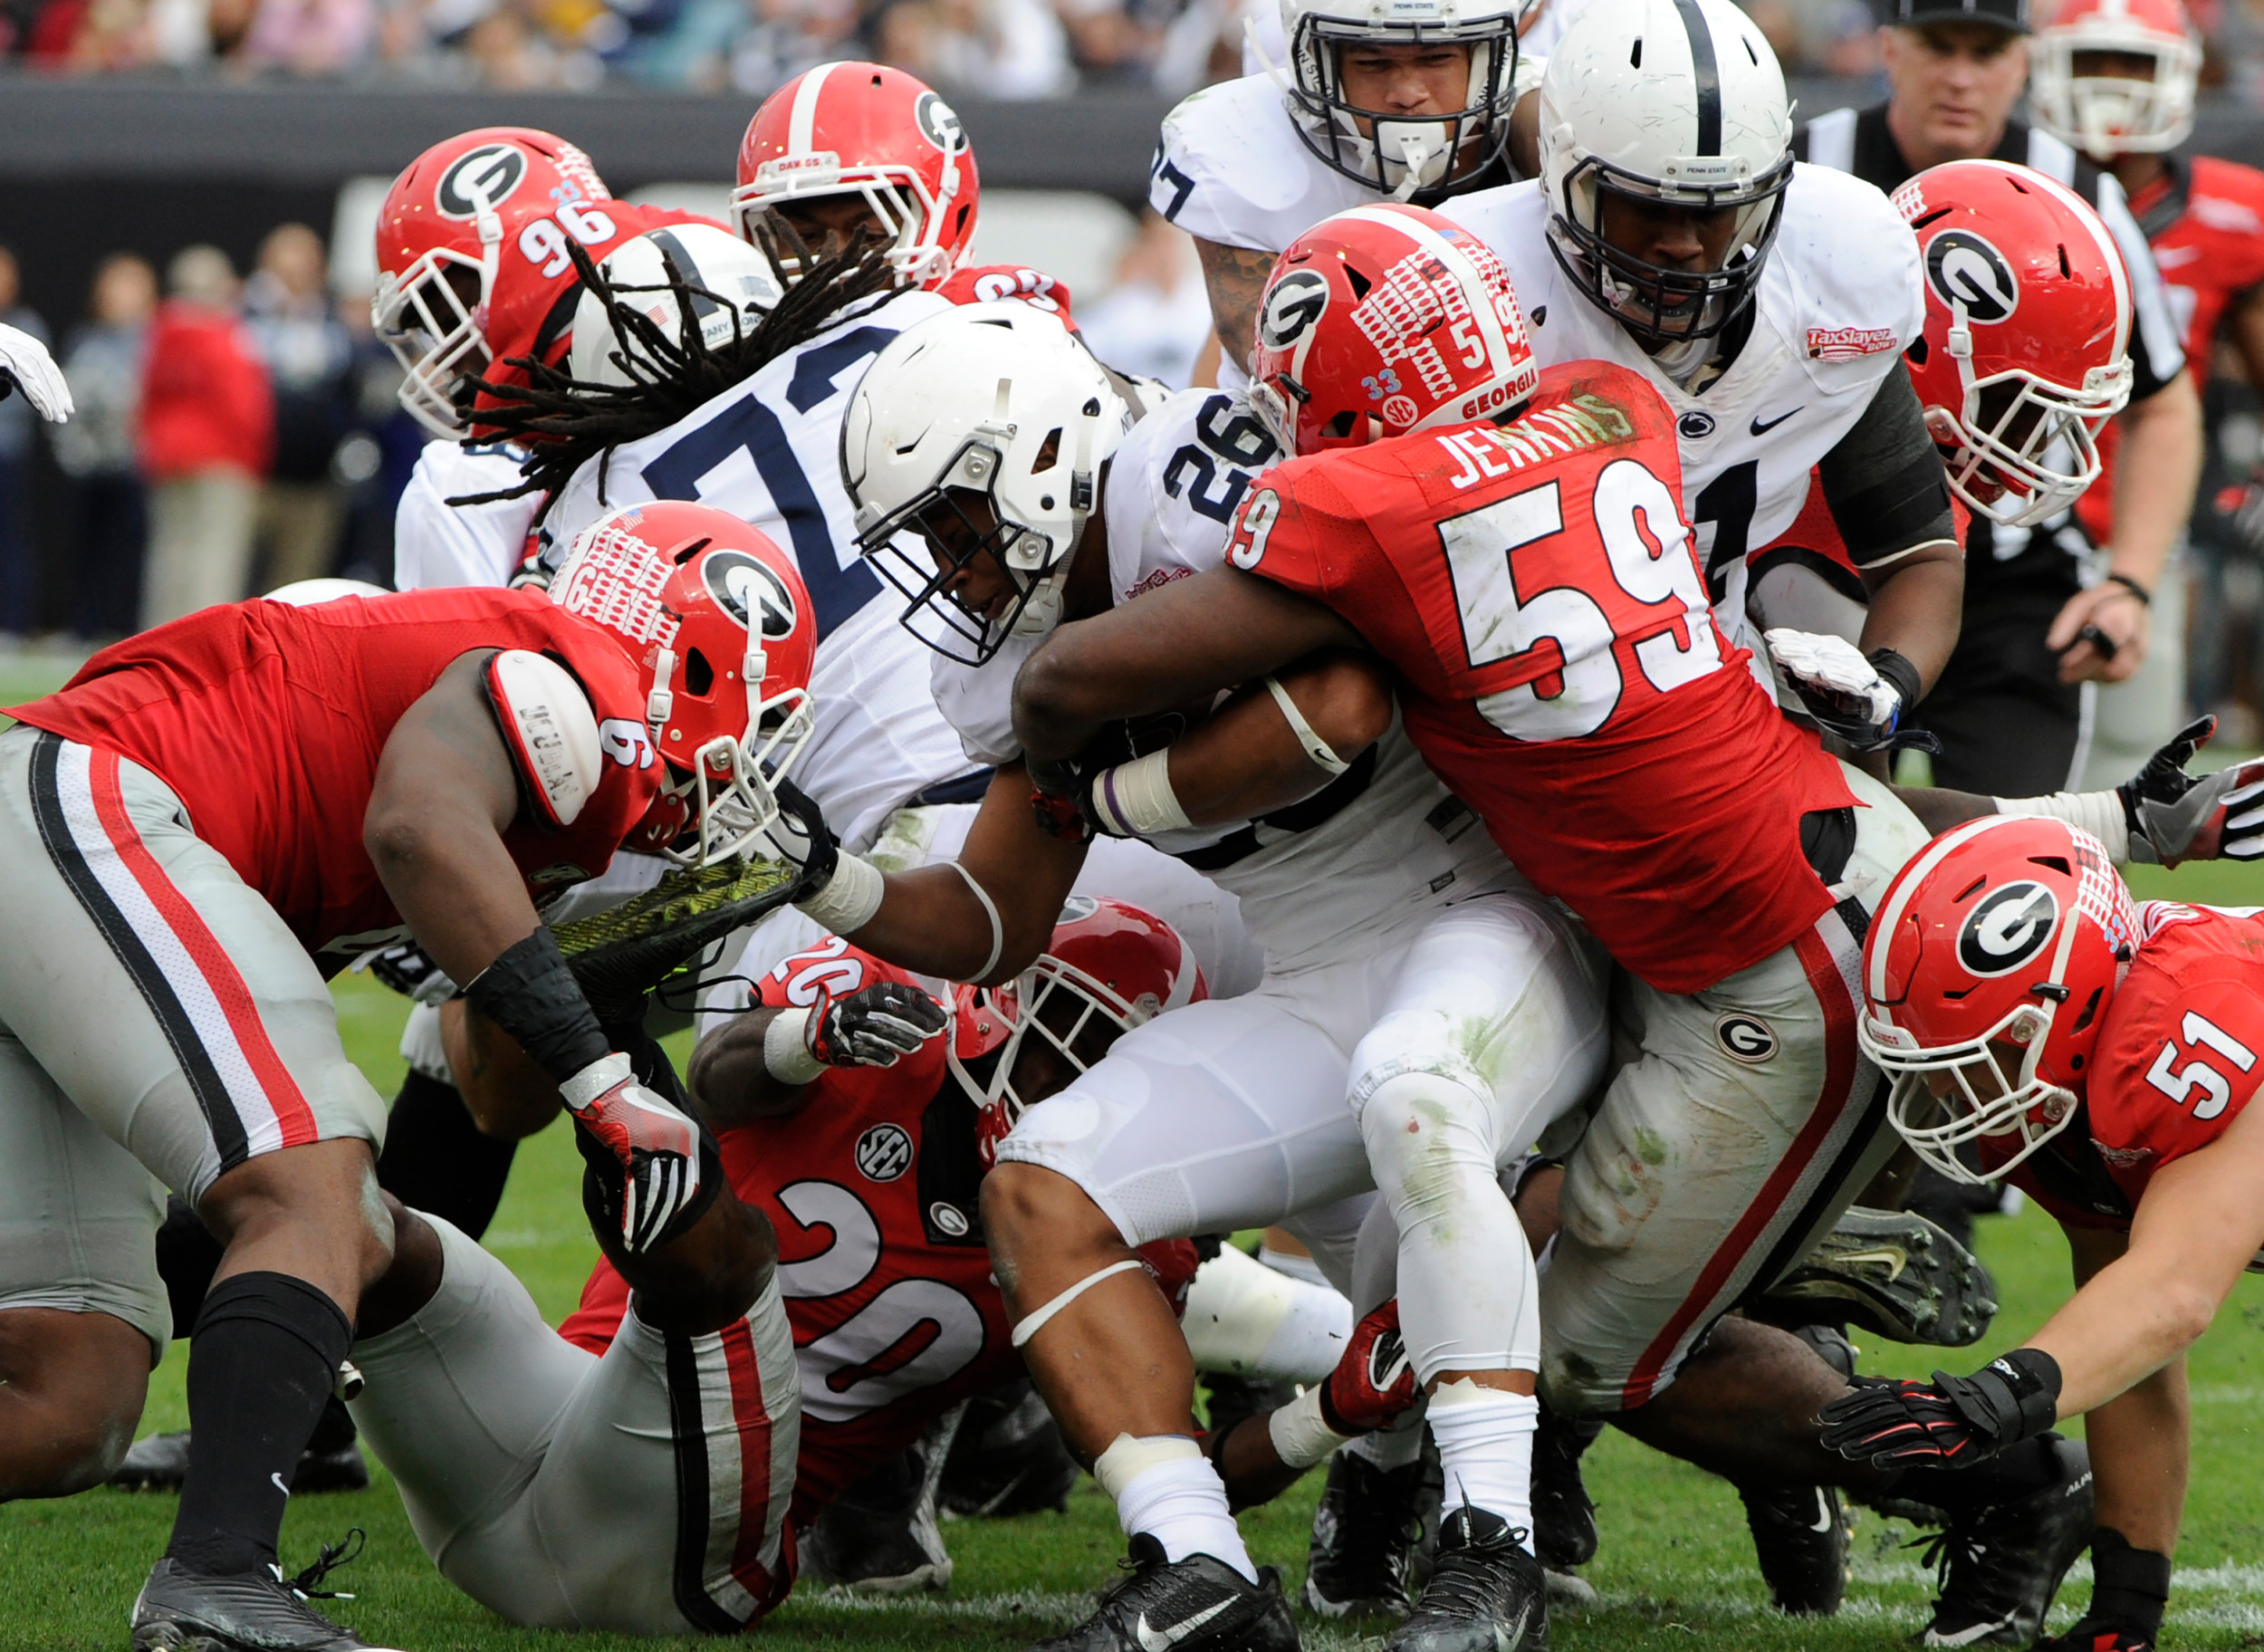 Georgia linebacker Jordan Jenkins (59) makes a tackle during the Bulldogs' game against the Penn State in the TaxSlayer Bowl at EverBank Field.